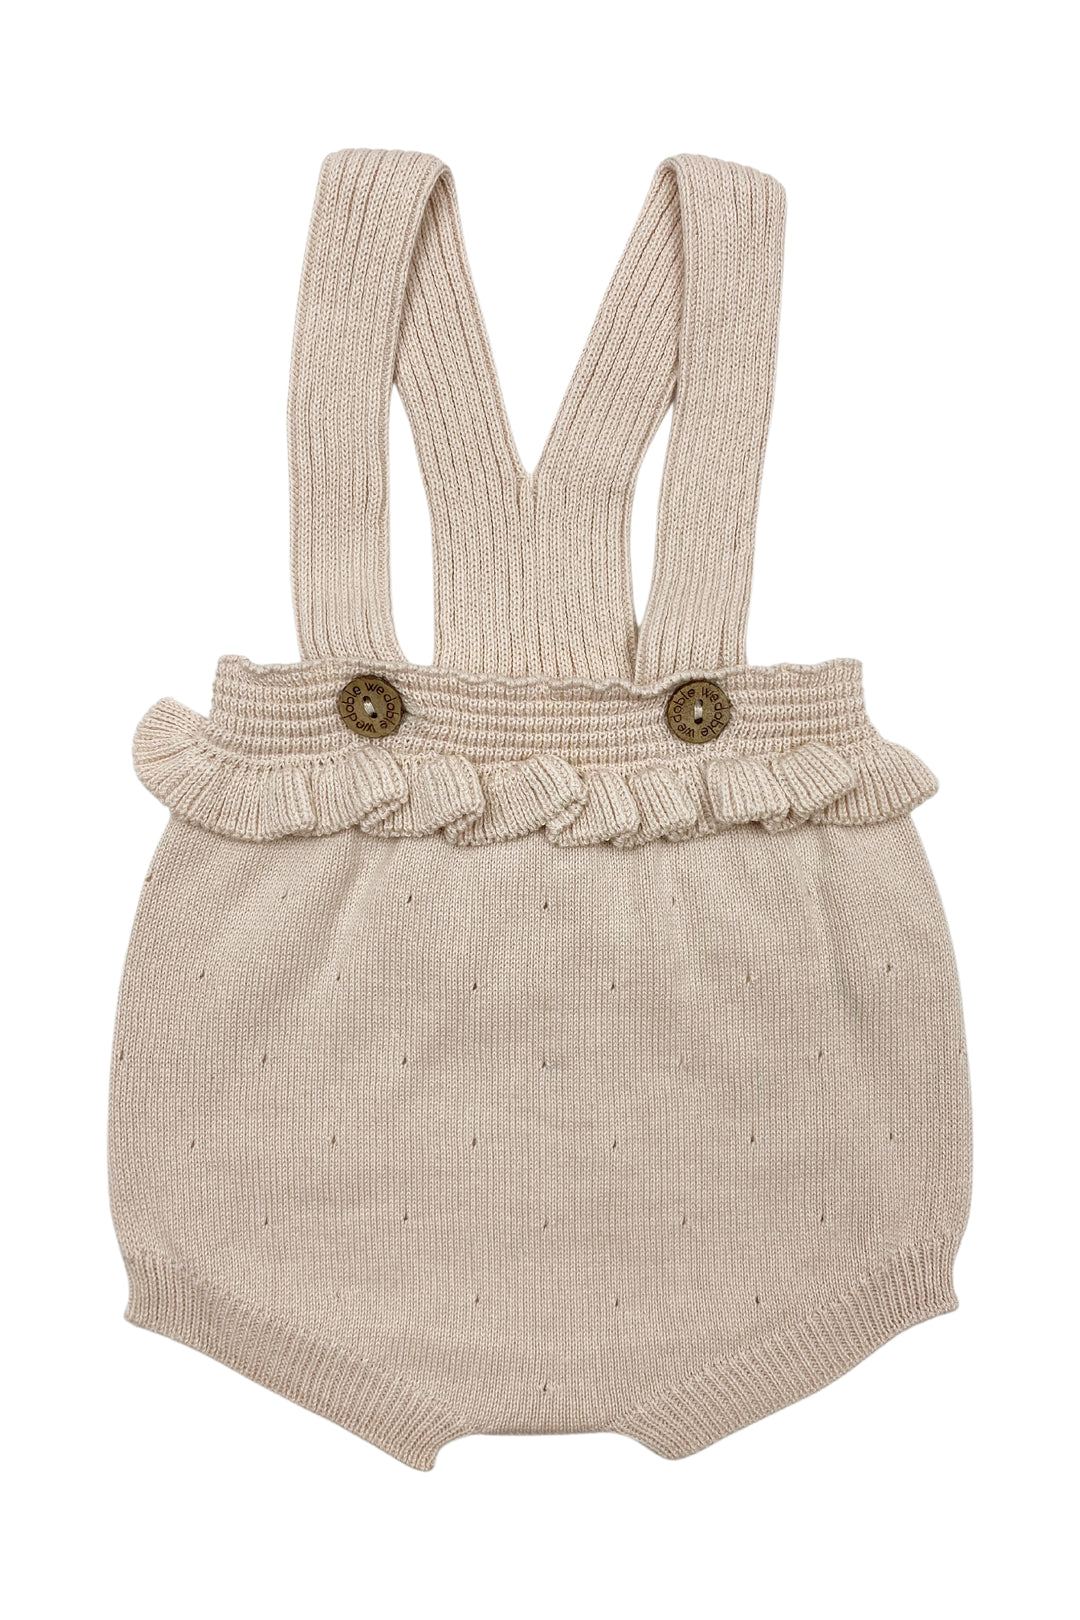 Wedoble "Aoife" Knit Bloomers with Braces | Millie and John